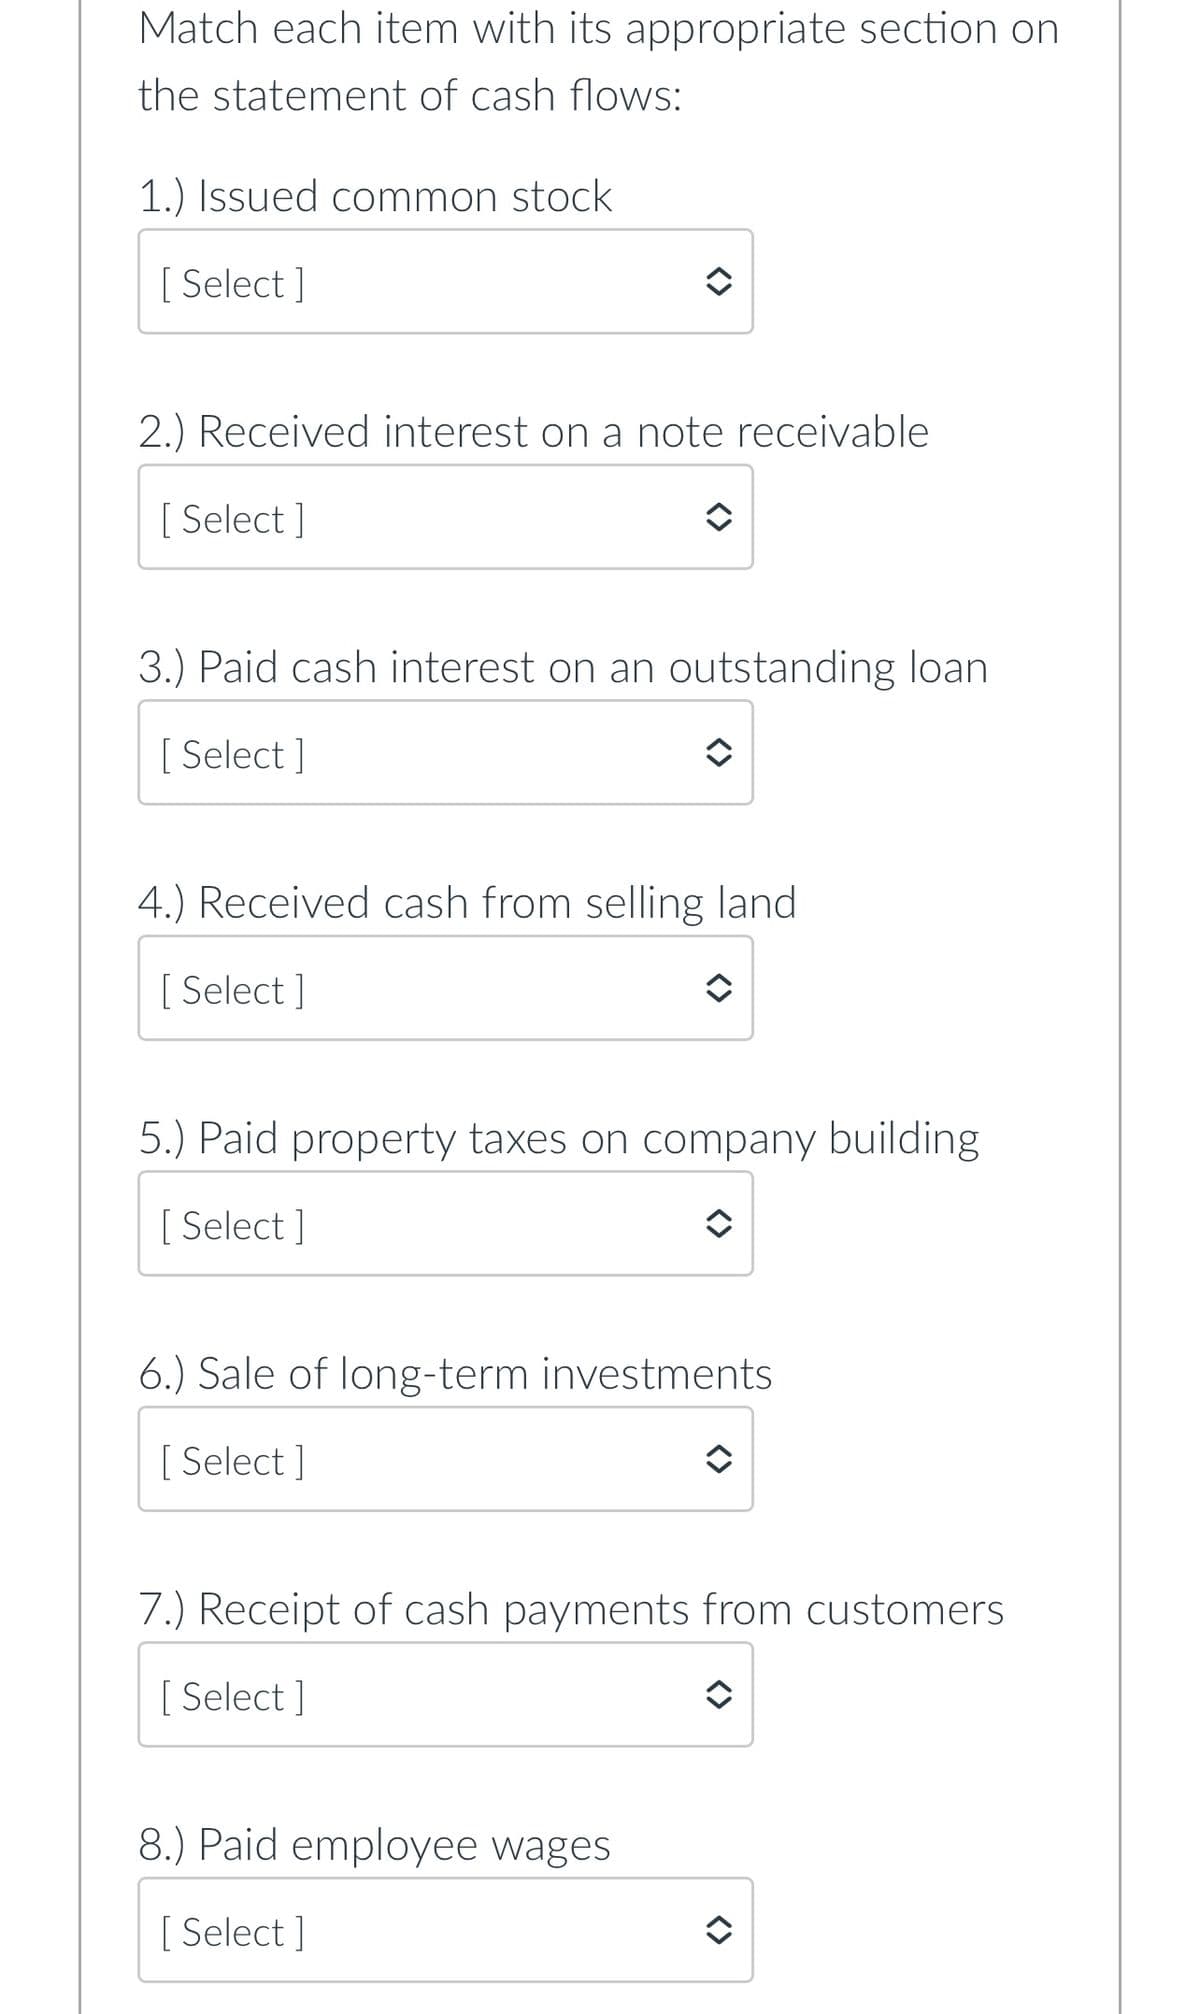 Match each item with its appropriate section on
the statement of cash flows:
1.) Issued common stock
[ Select]
2.) Received interest on a note receivable
[Select]
3.) Paid cash interest on an outstanding loan
[ Select]
4.) Received cash from selling land
[ Select]
5.) Paid property taxes on company building
[ Select]
6.) Sale of long-term investments
[Select]
7.) Receipt of cash payments from customers
[ Select]
8.) Paid employee wages
[ Select]